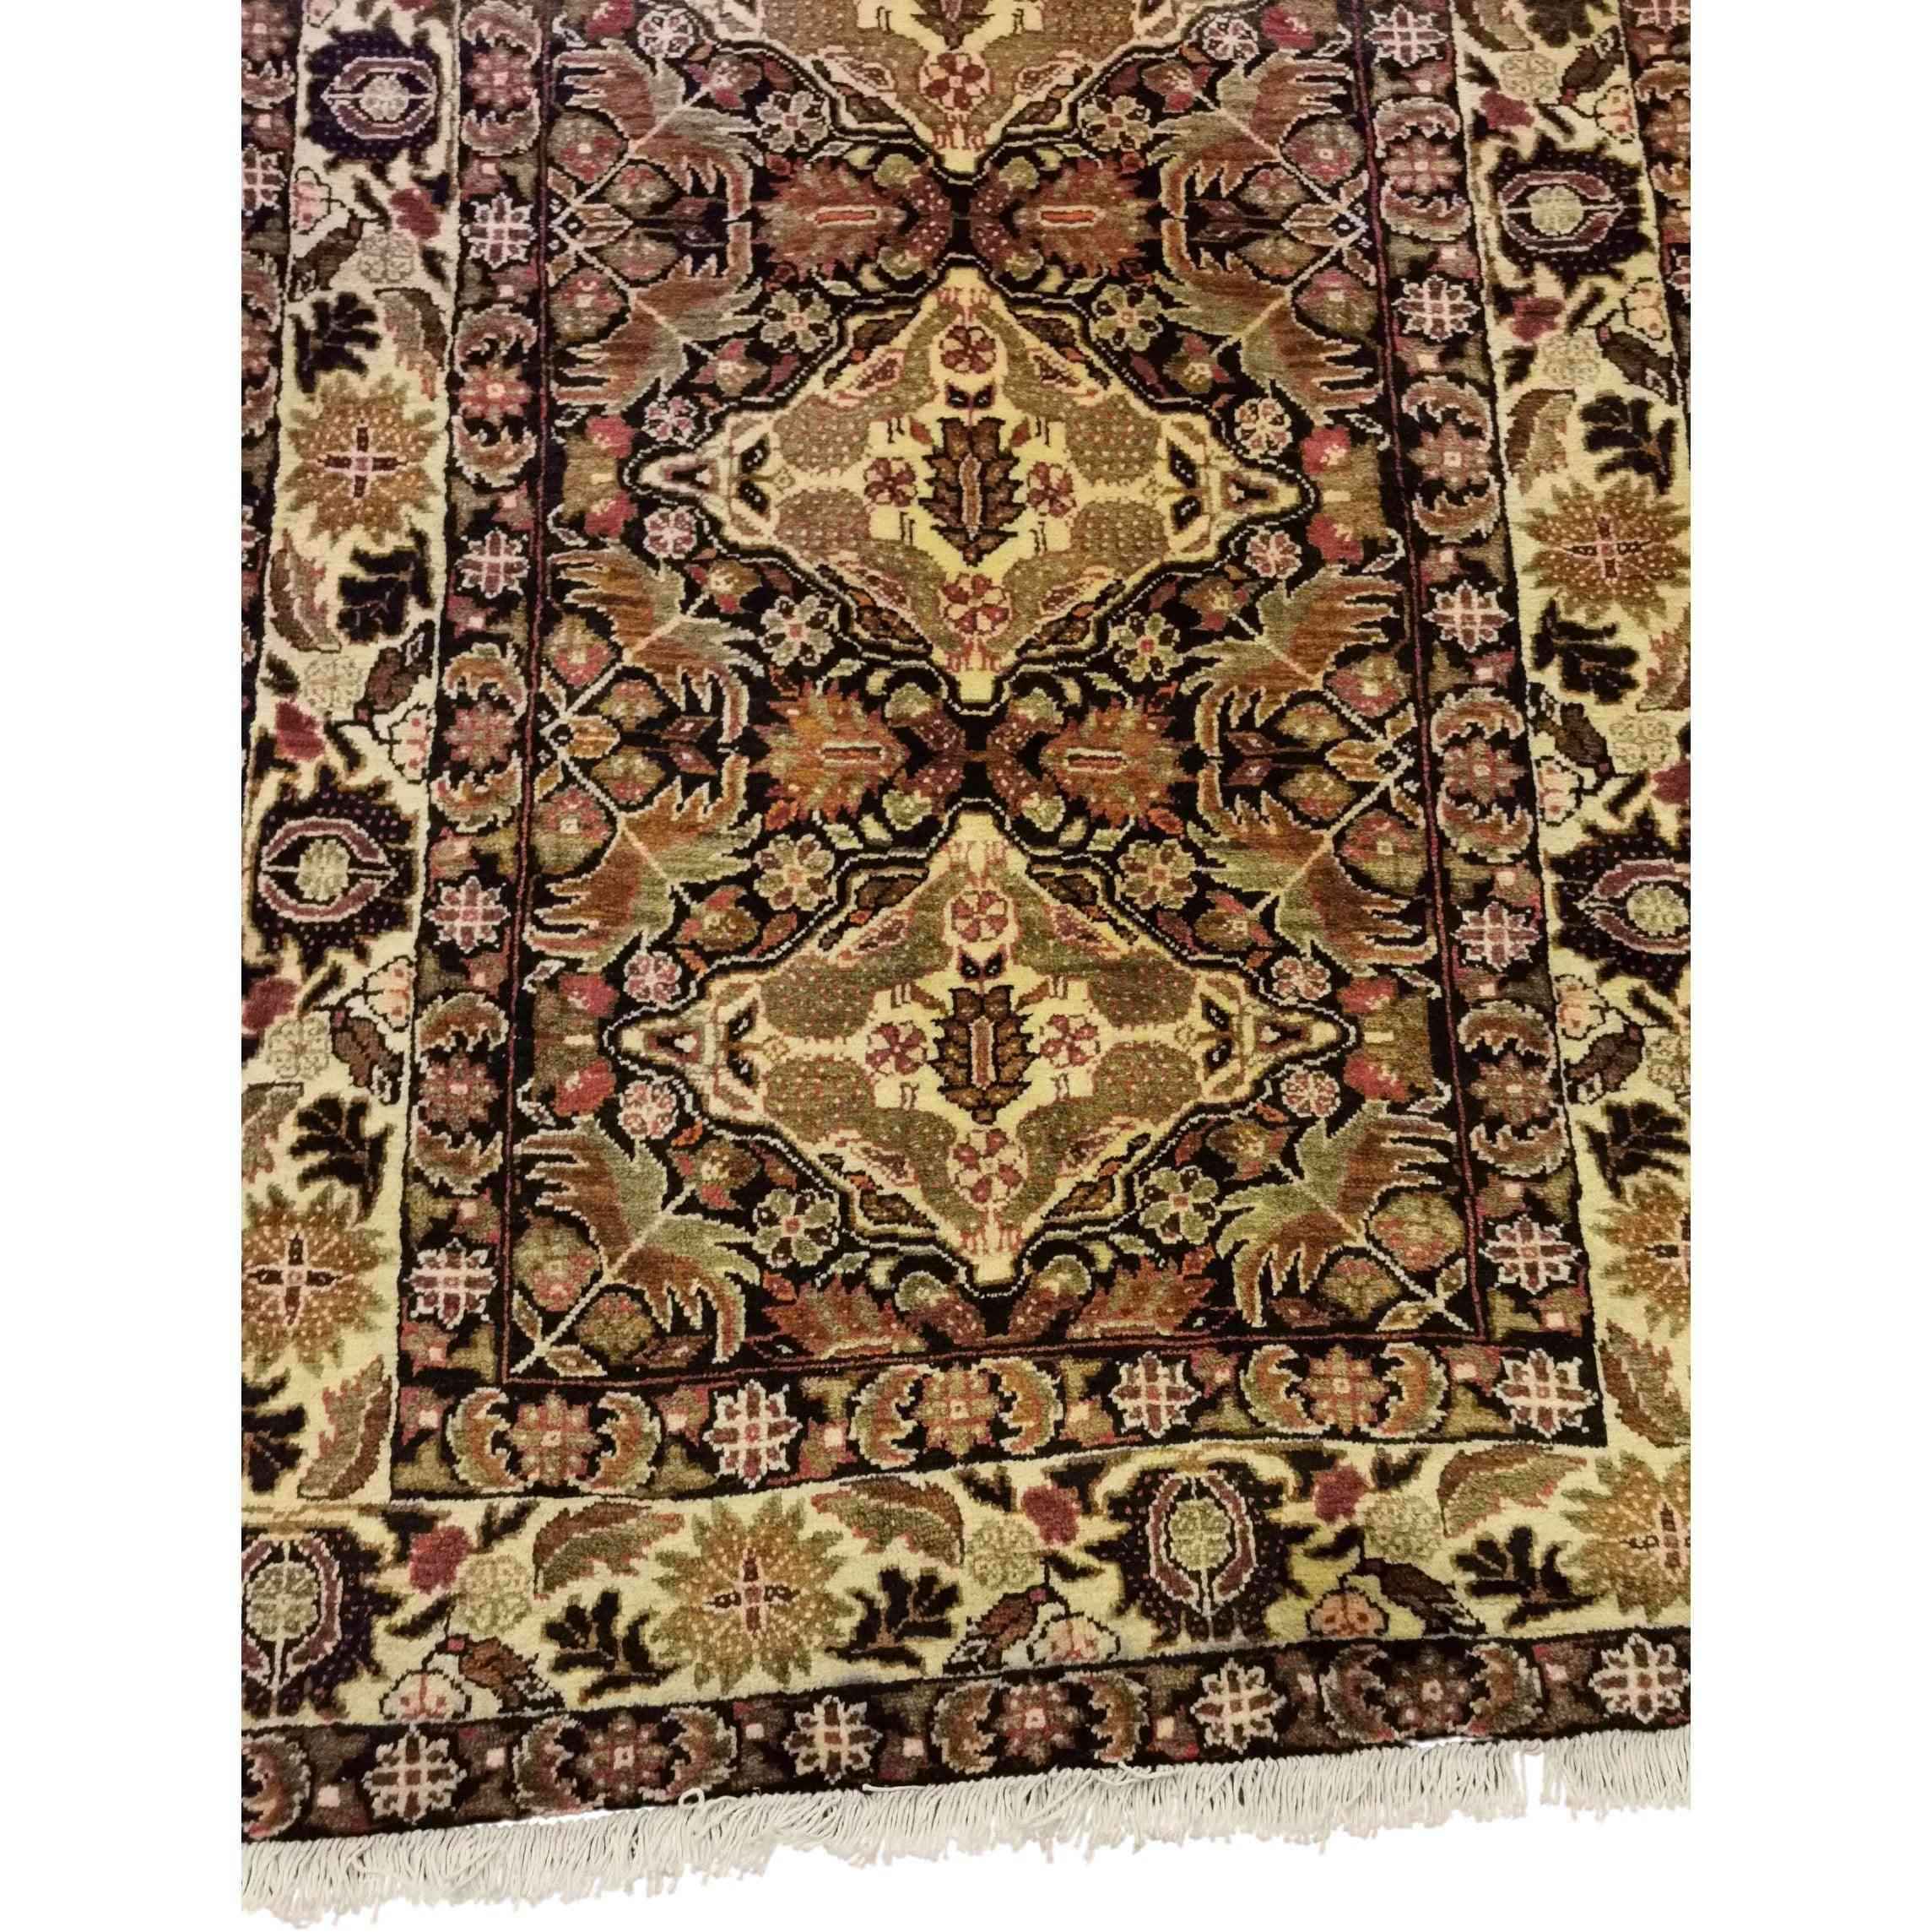 190 x 111 cm Persian Baluch Traditional Brown Rug - Rugmaster